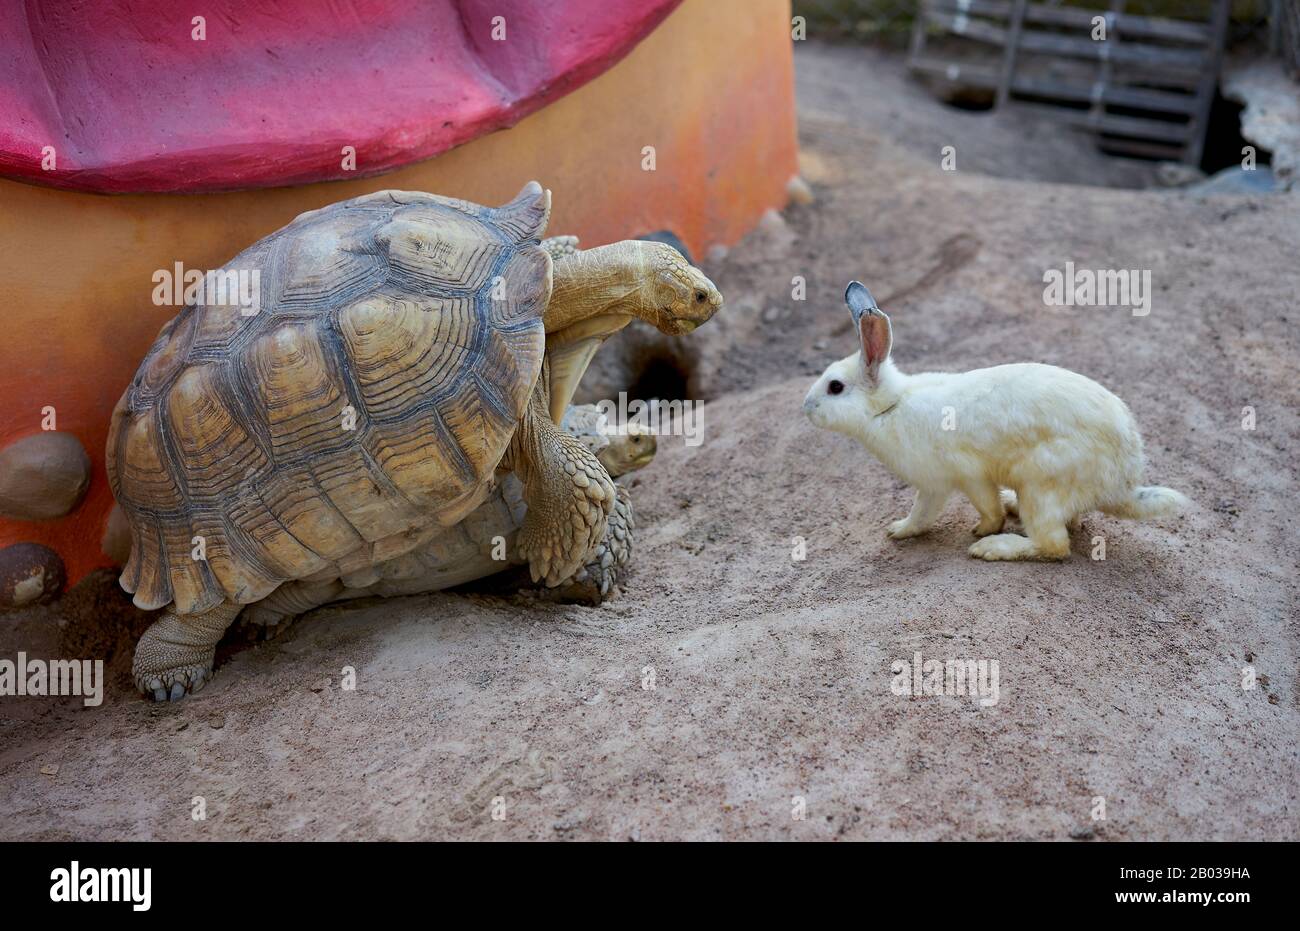 An inquisitive rabbit looking at turtles making love. Stock Photo